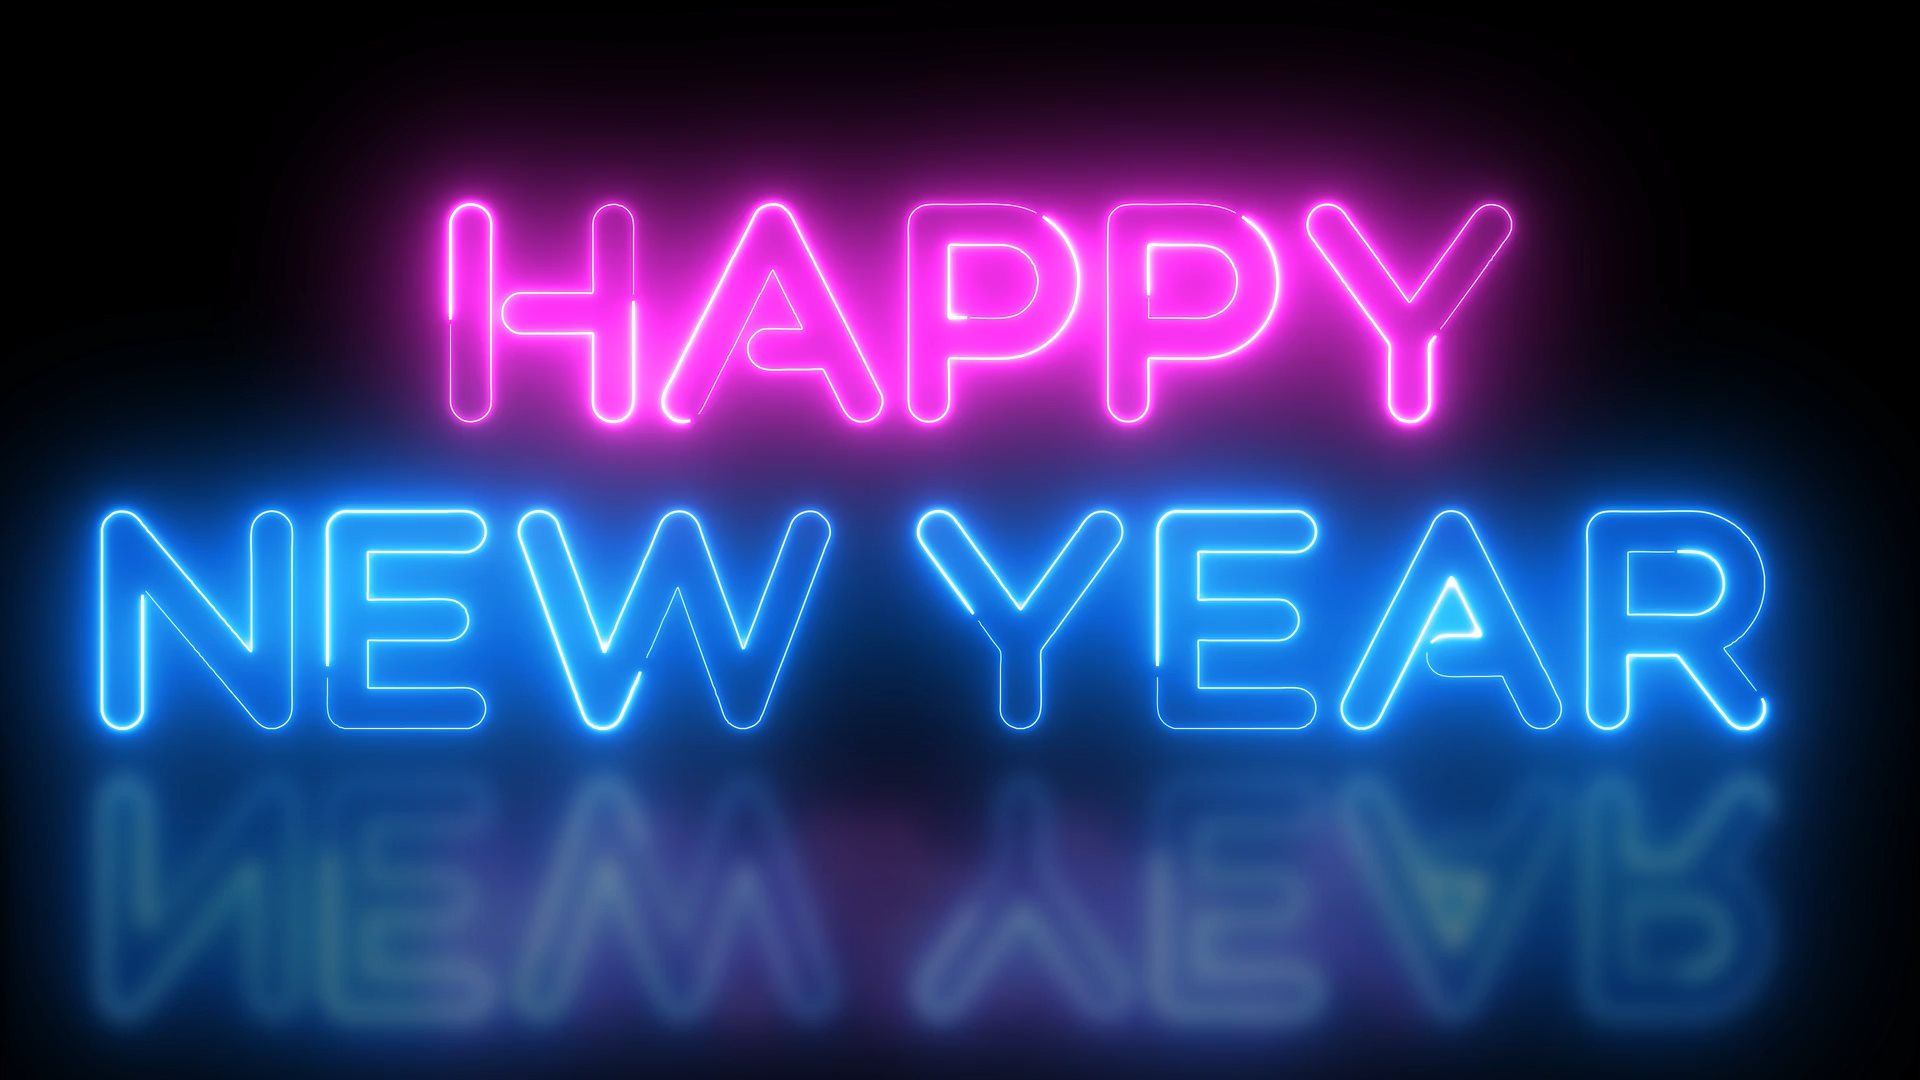 Video of neon Happy New Year text with exploding fireworks